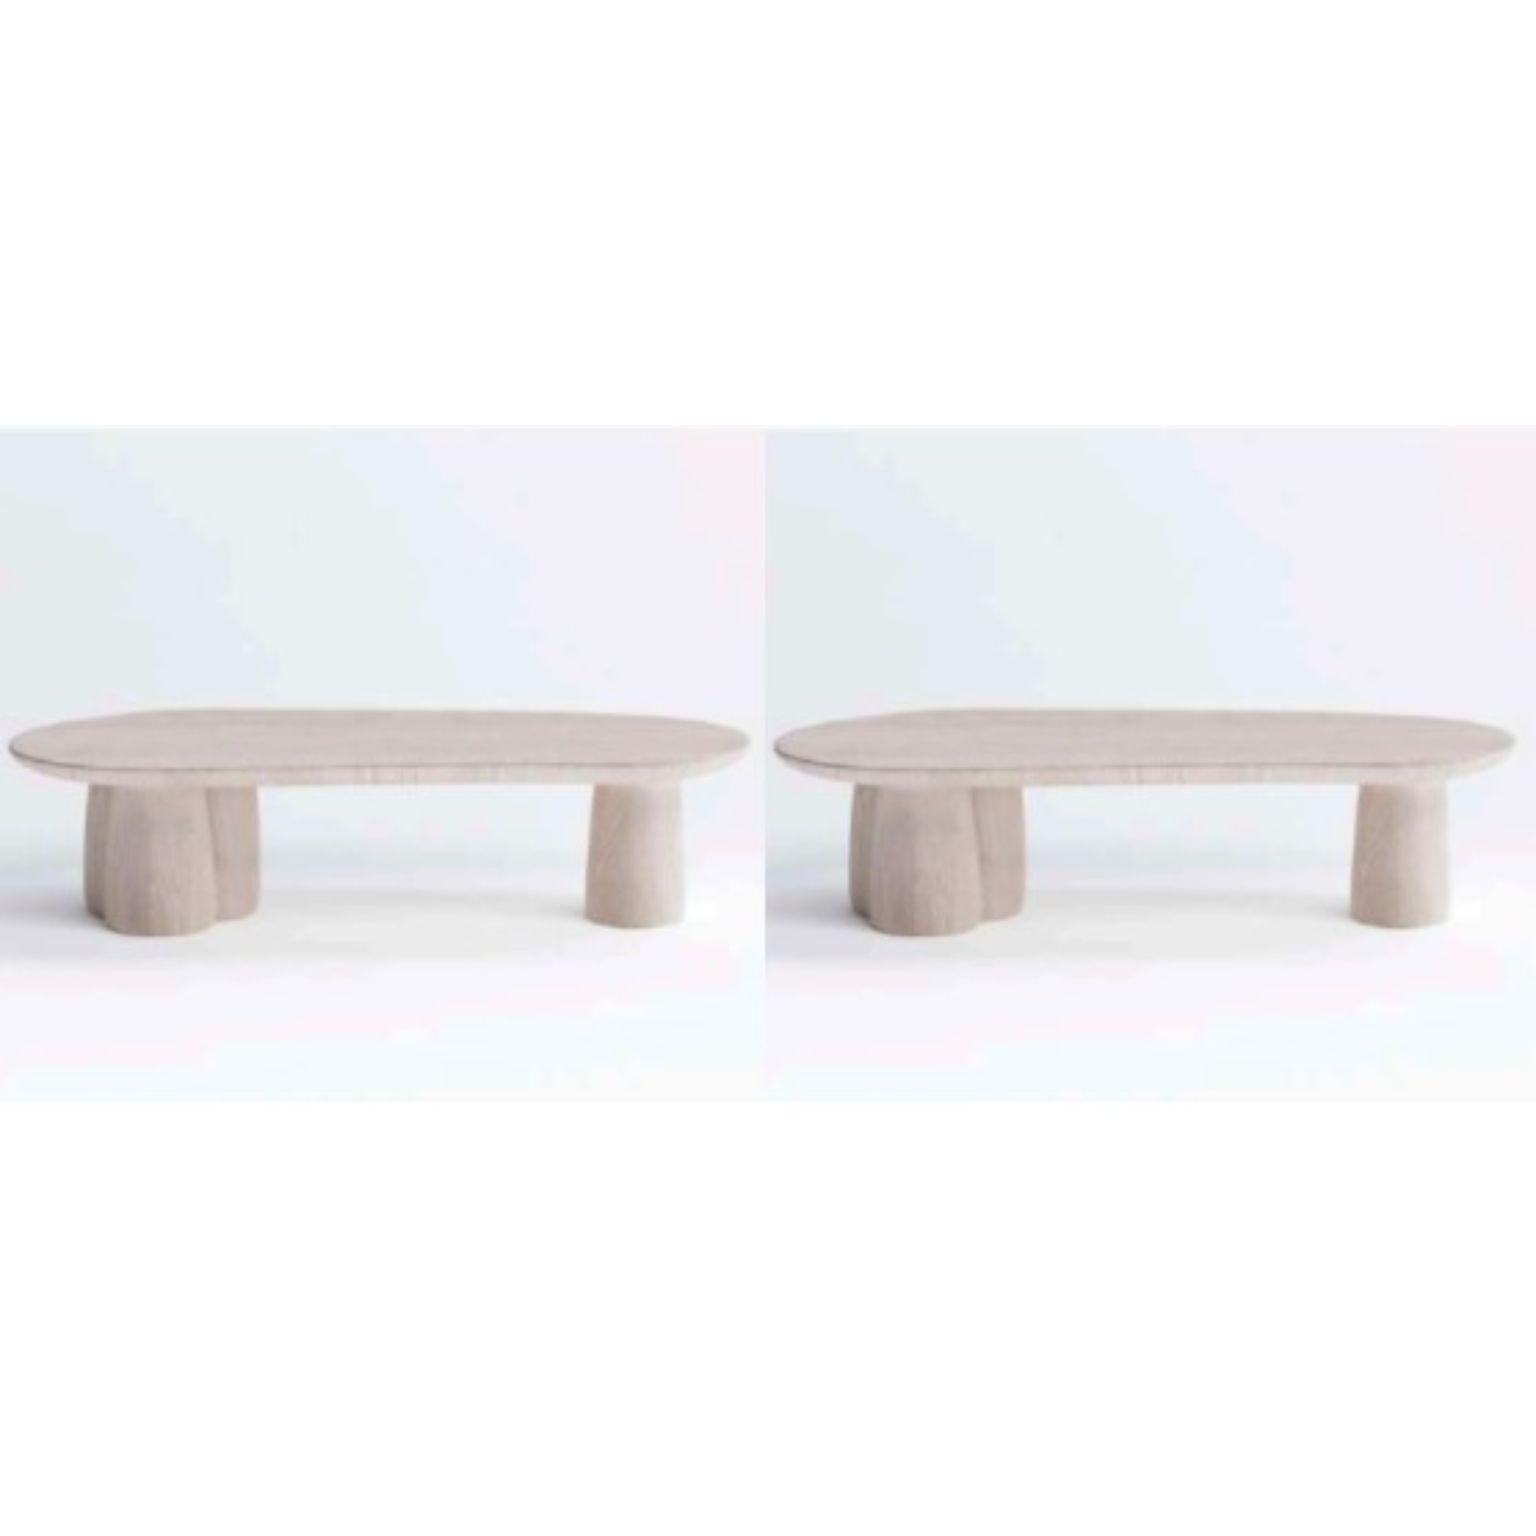 Set of 2 long coffee tables by Faina
Design: Victoriya Yakusha
Materials: ash in natural or black color
Dimensions: W 113 x D 47 x H 29 cm

Like strong sunflower stems, SONIAH tables are fed with energy from the ground, saturating with it the space